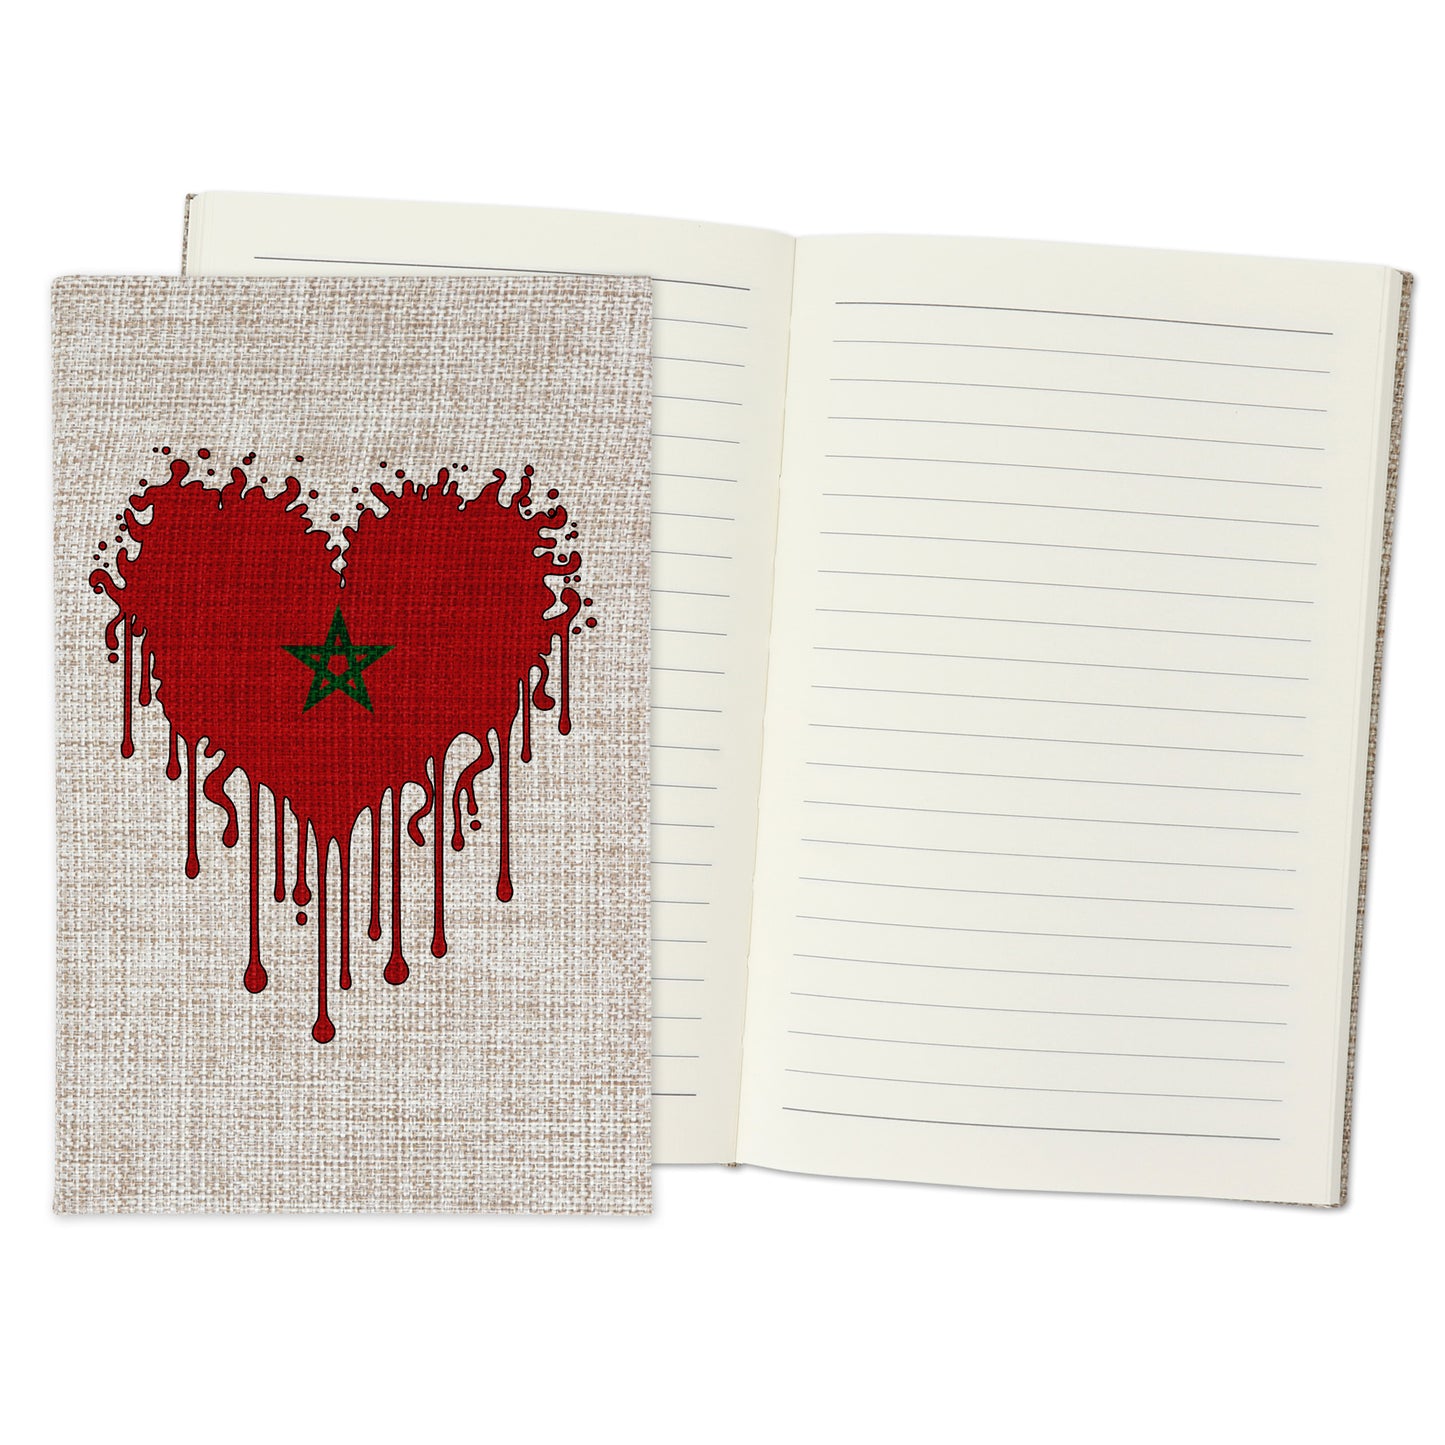 Morocco Dripping Heart Design Burlap Notebook Journal with Lined Pages